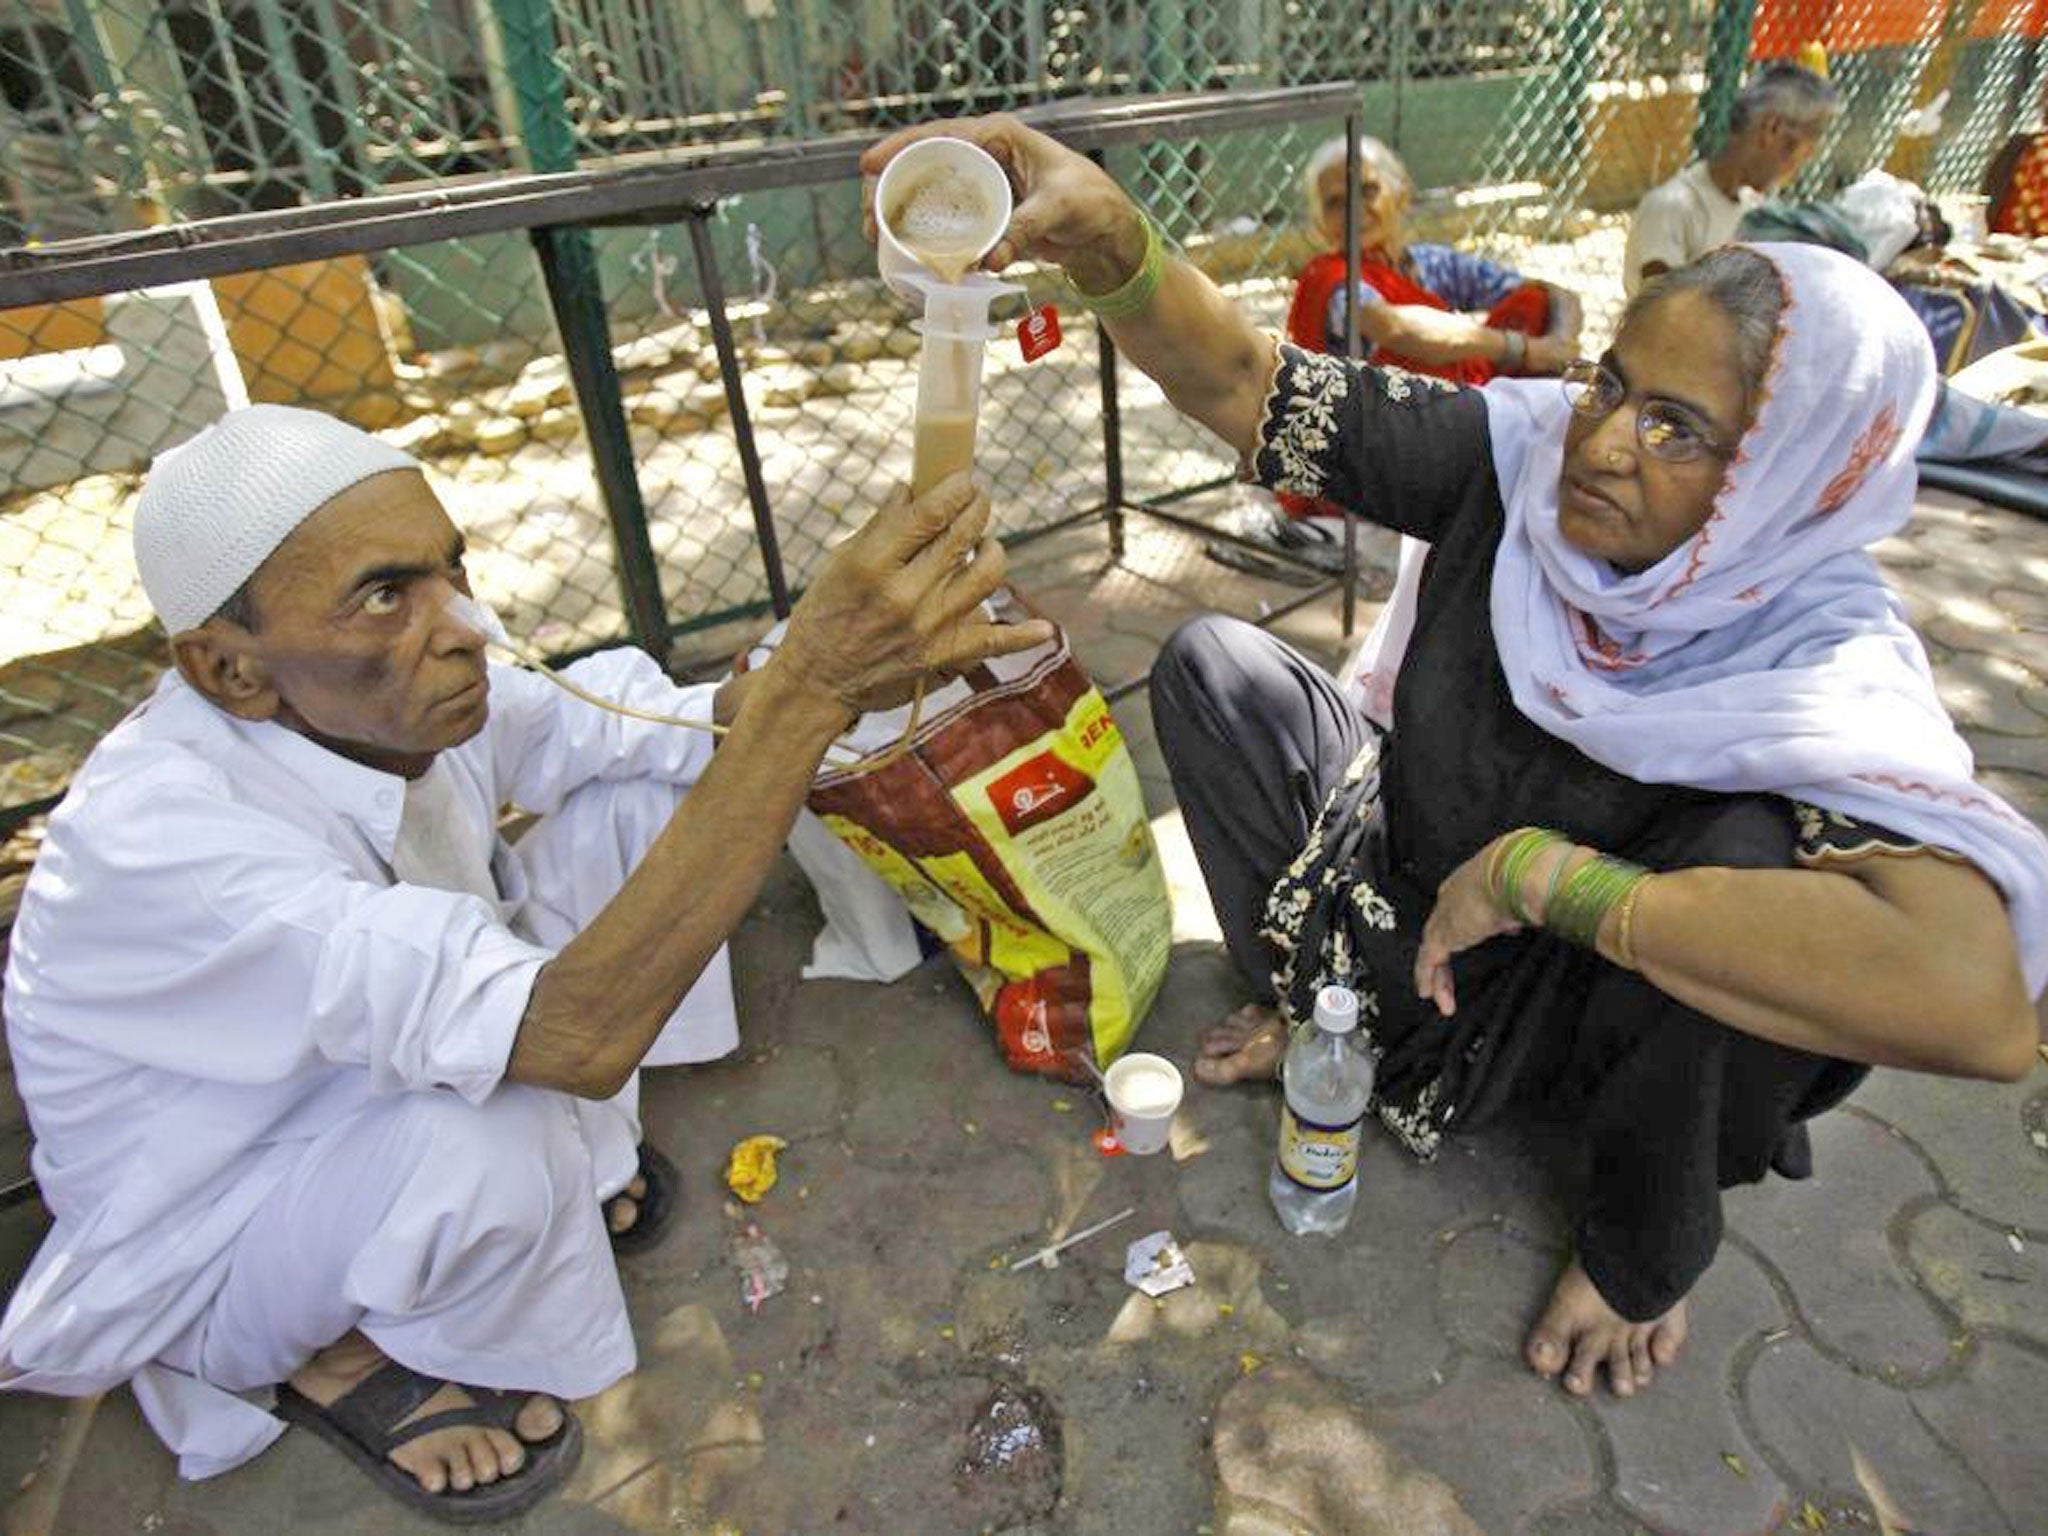 Kamal Ahmad, 68, who is suffering from throat cancer, gets help from a relative to drink tea through his nose outside Tata cancer hospital in Mumbai, India